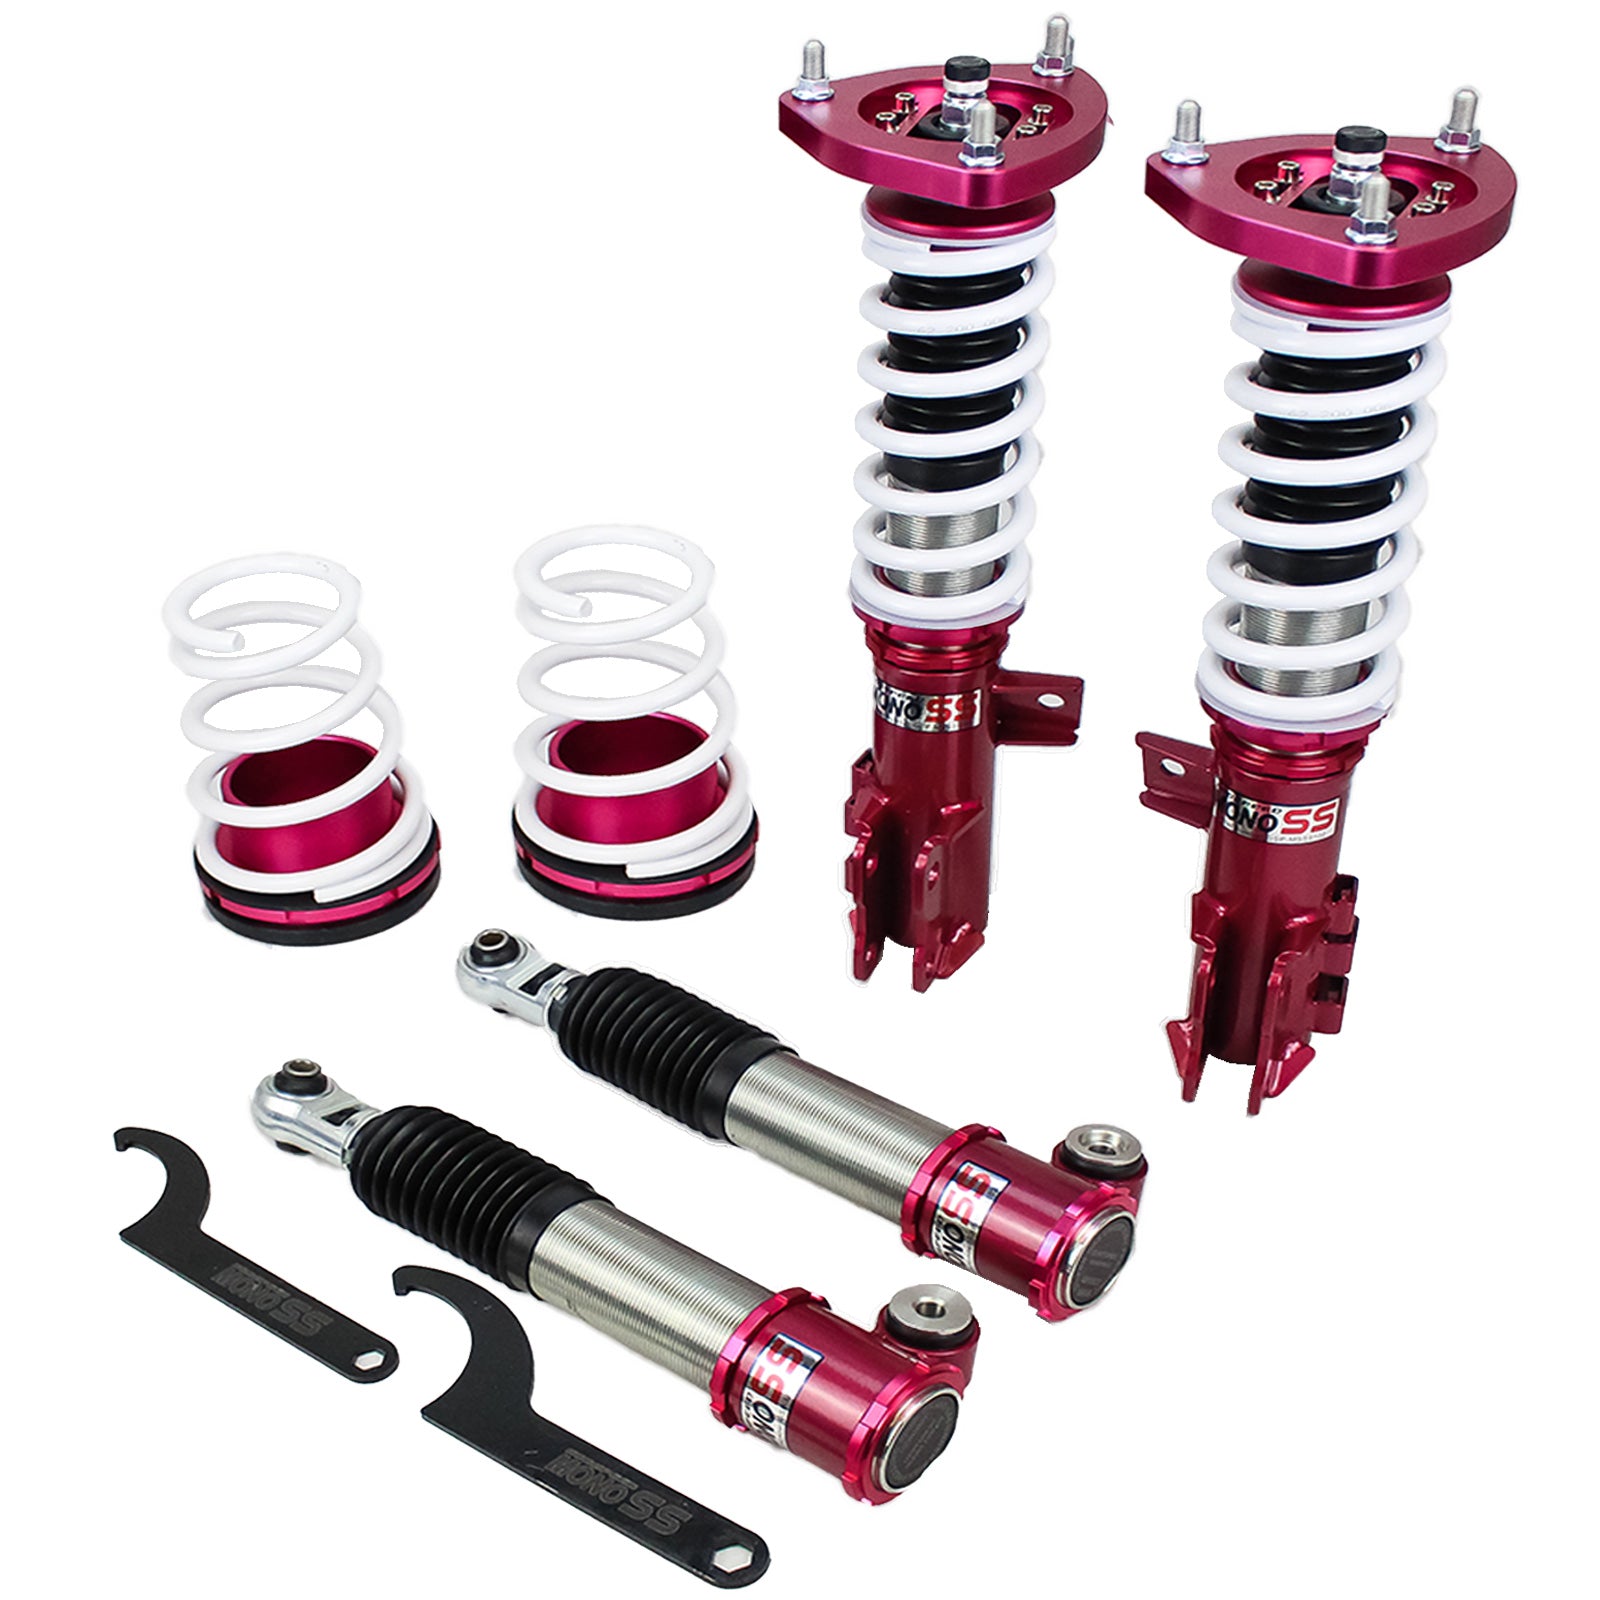 Godspeed MSS0102-C MonoSS Coilover Lowering Kit, Fully Adjustable, Ride Height, Spring Tension And 16 Click Damping, Kia Forte Koup(TD) 2010-13